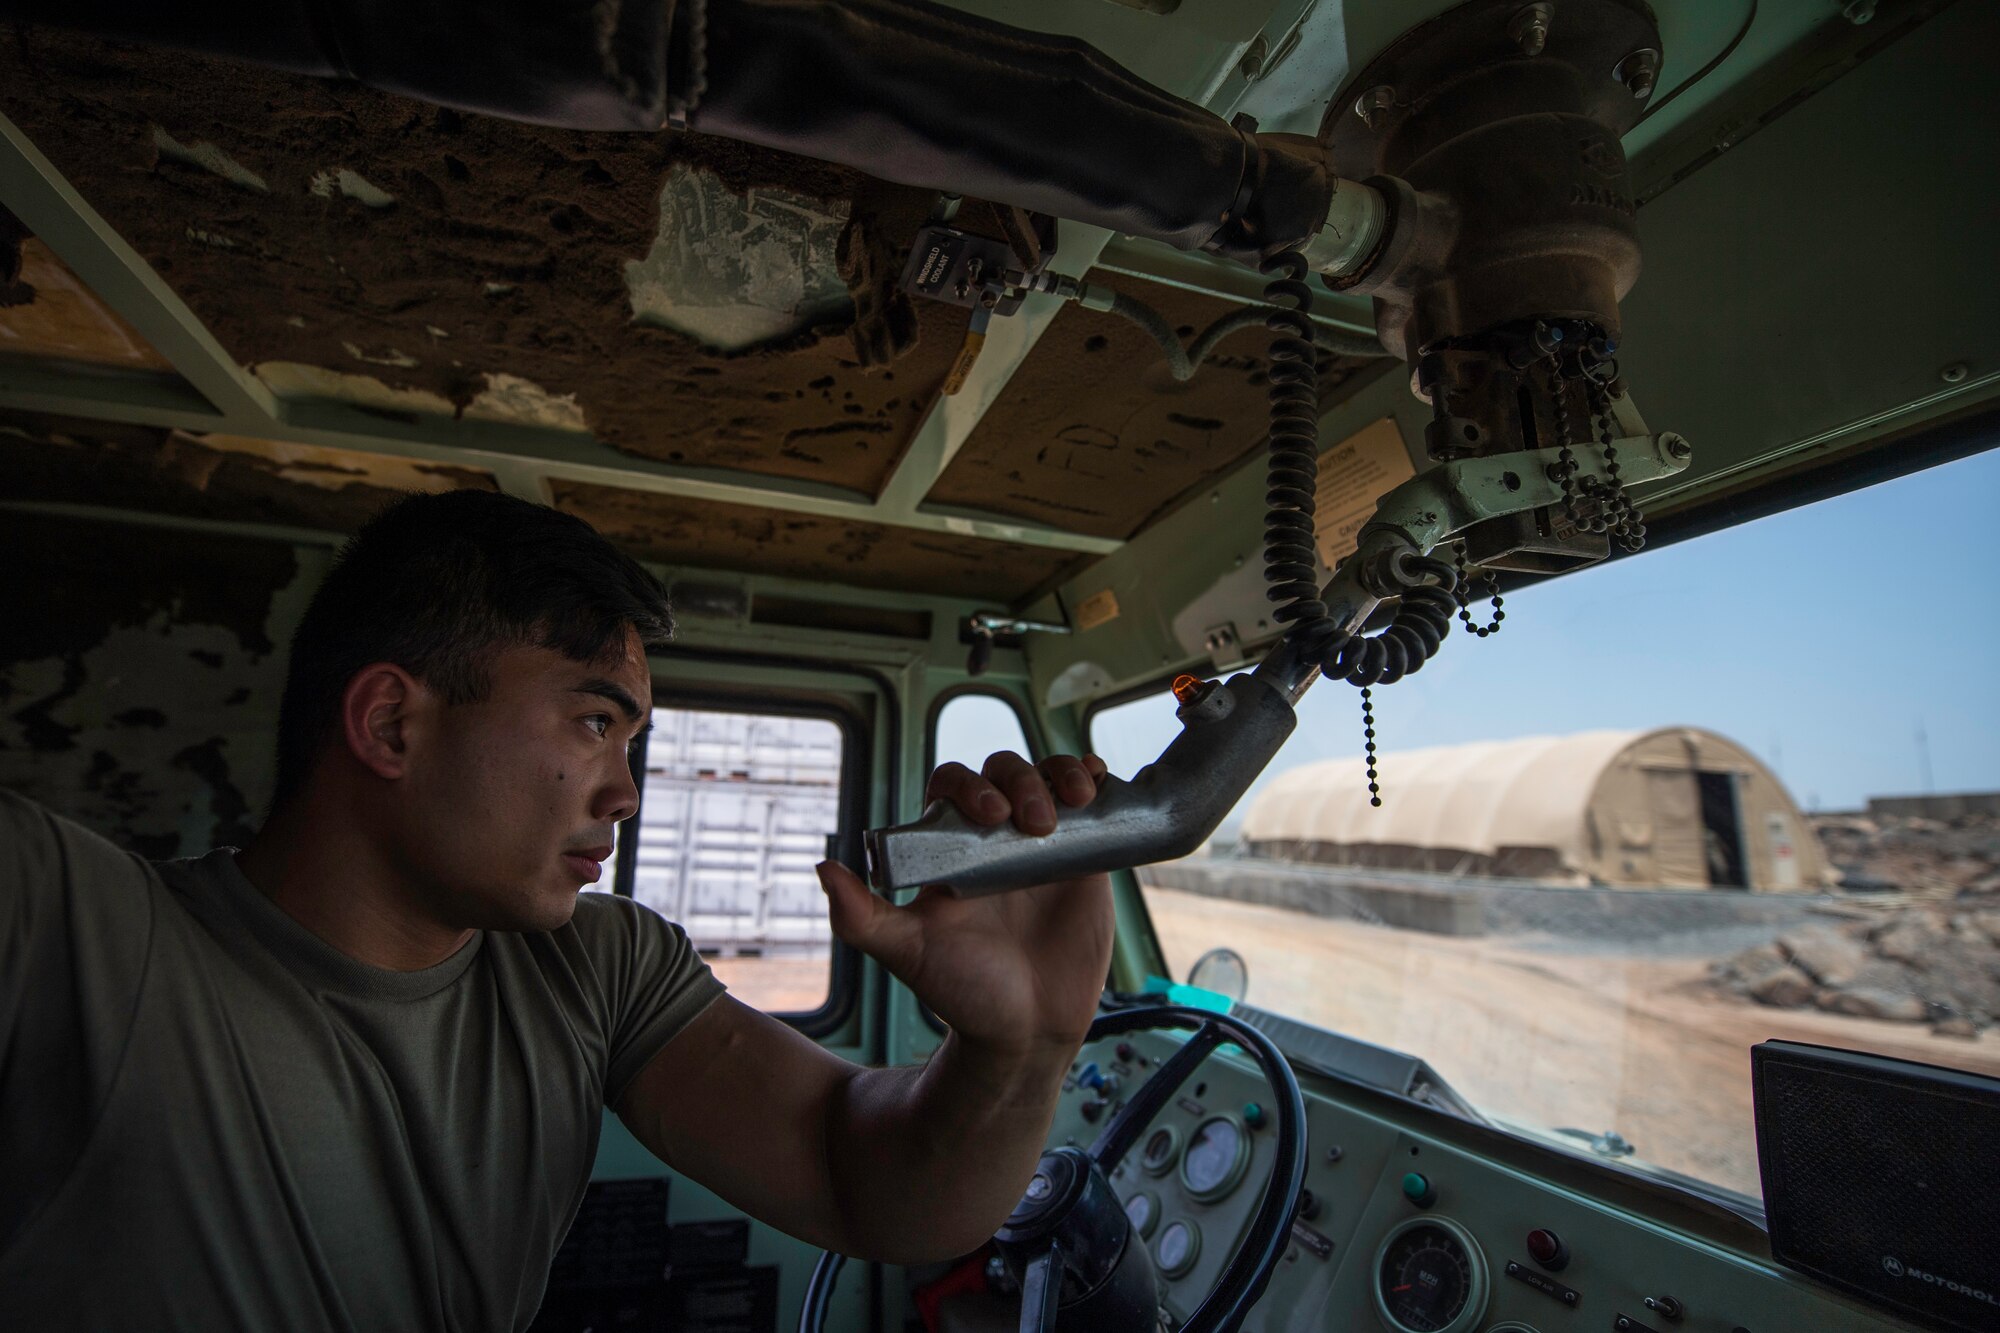 U.S. Air Force Airman 1st Class Anthon Williams, 870th Air Expeditionary Squadron firefighter, pulls a lever to trigger the fire truck’s front hose at Chabelley Airfield, Djibouti, June 11, 2019. Williams and his fellow Airmen inspect the equipment daily to ensure the team’s readiness. (U.S. Air Force photo by Staff Sgt. Devin Boyer)